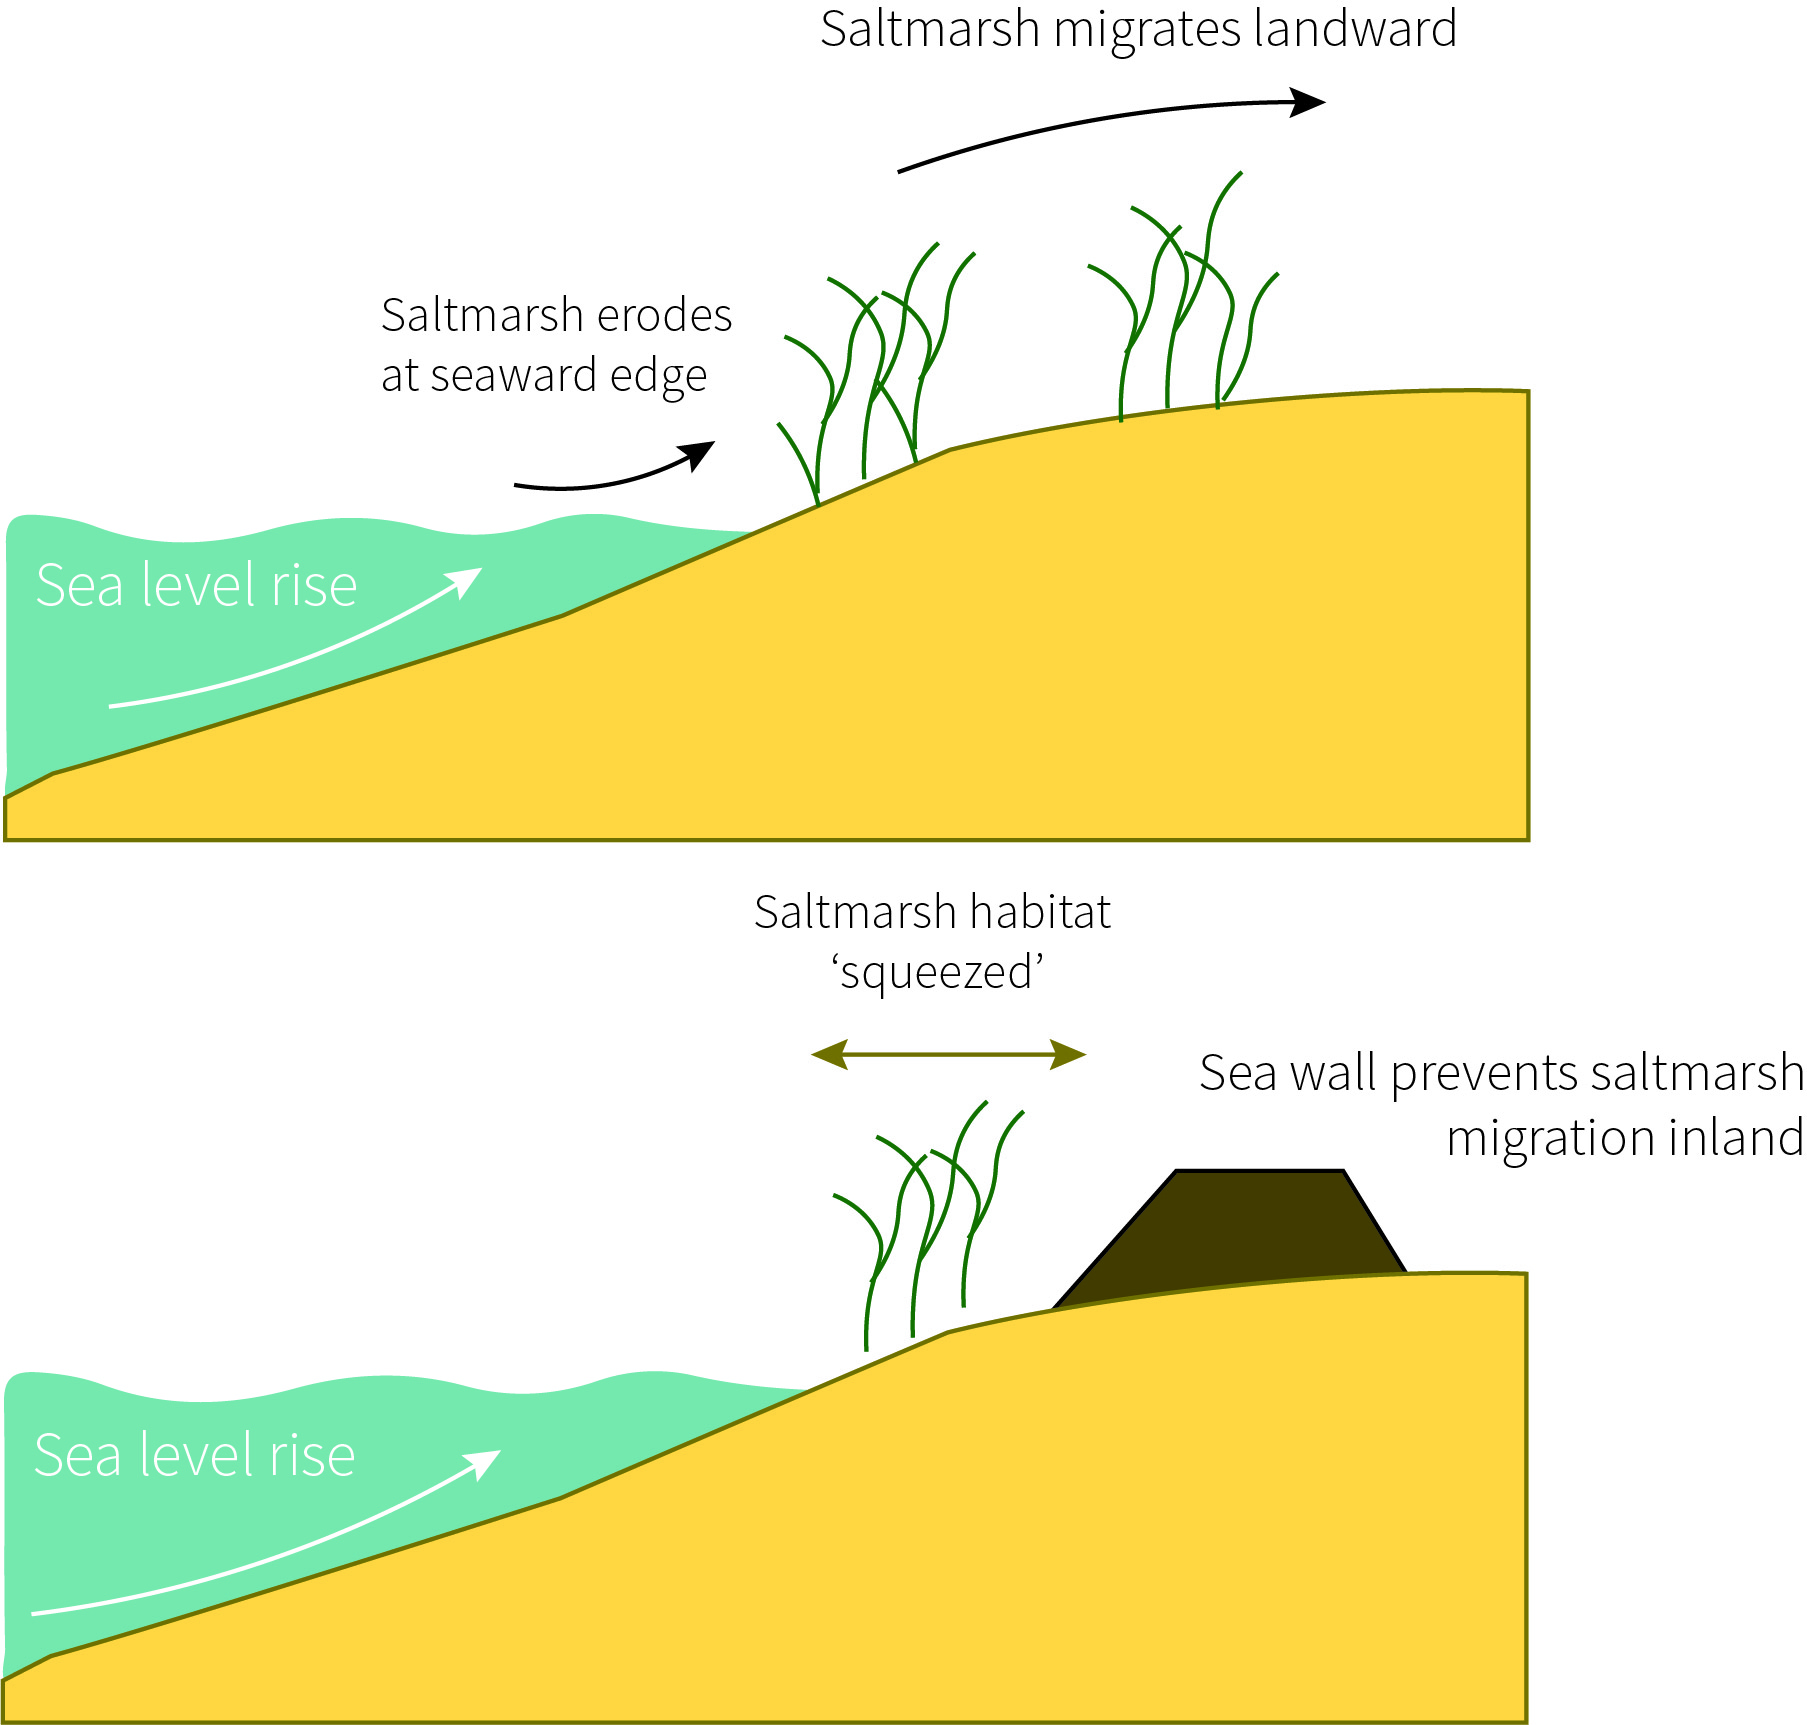 Schematic image showing the effect of sea level rise on saltmarshes in coastal regions without seawalls (saltmarsh habitat migrates inland) and with sea walls (seawall prevents saltmarsh from migrating inland leading to a contraction of the area of saltmarsh known as 'coastal squeeze').